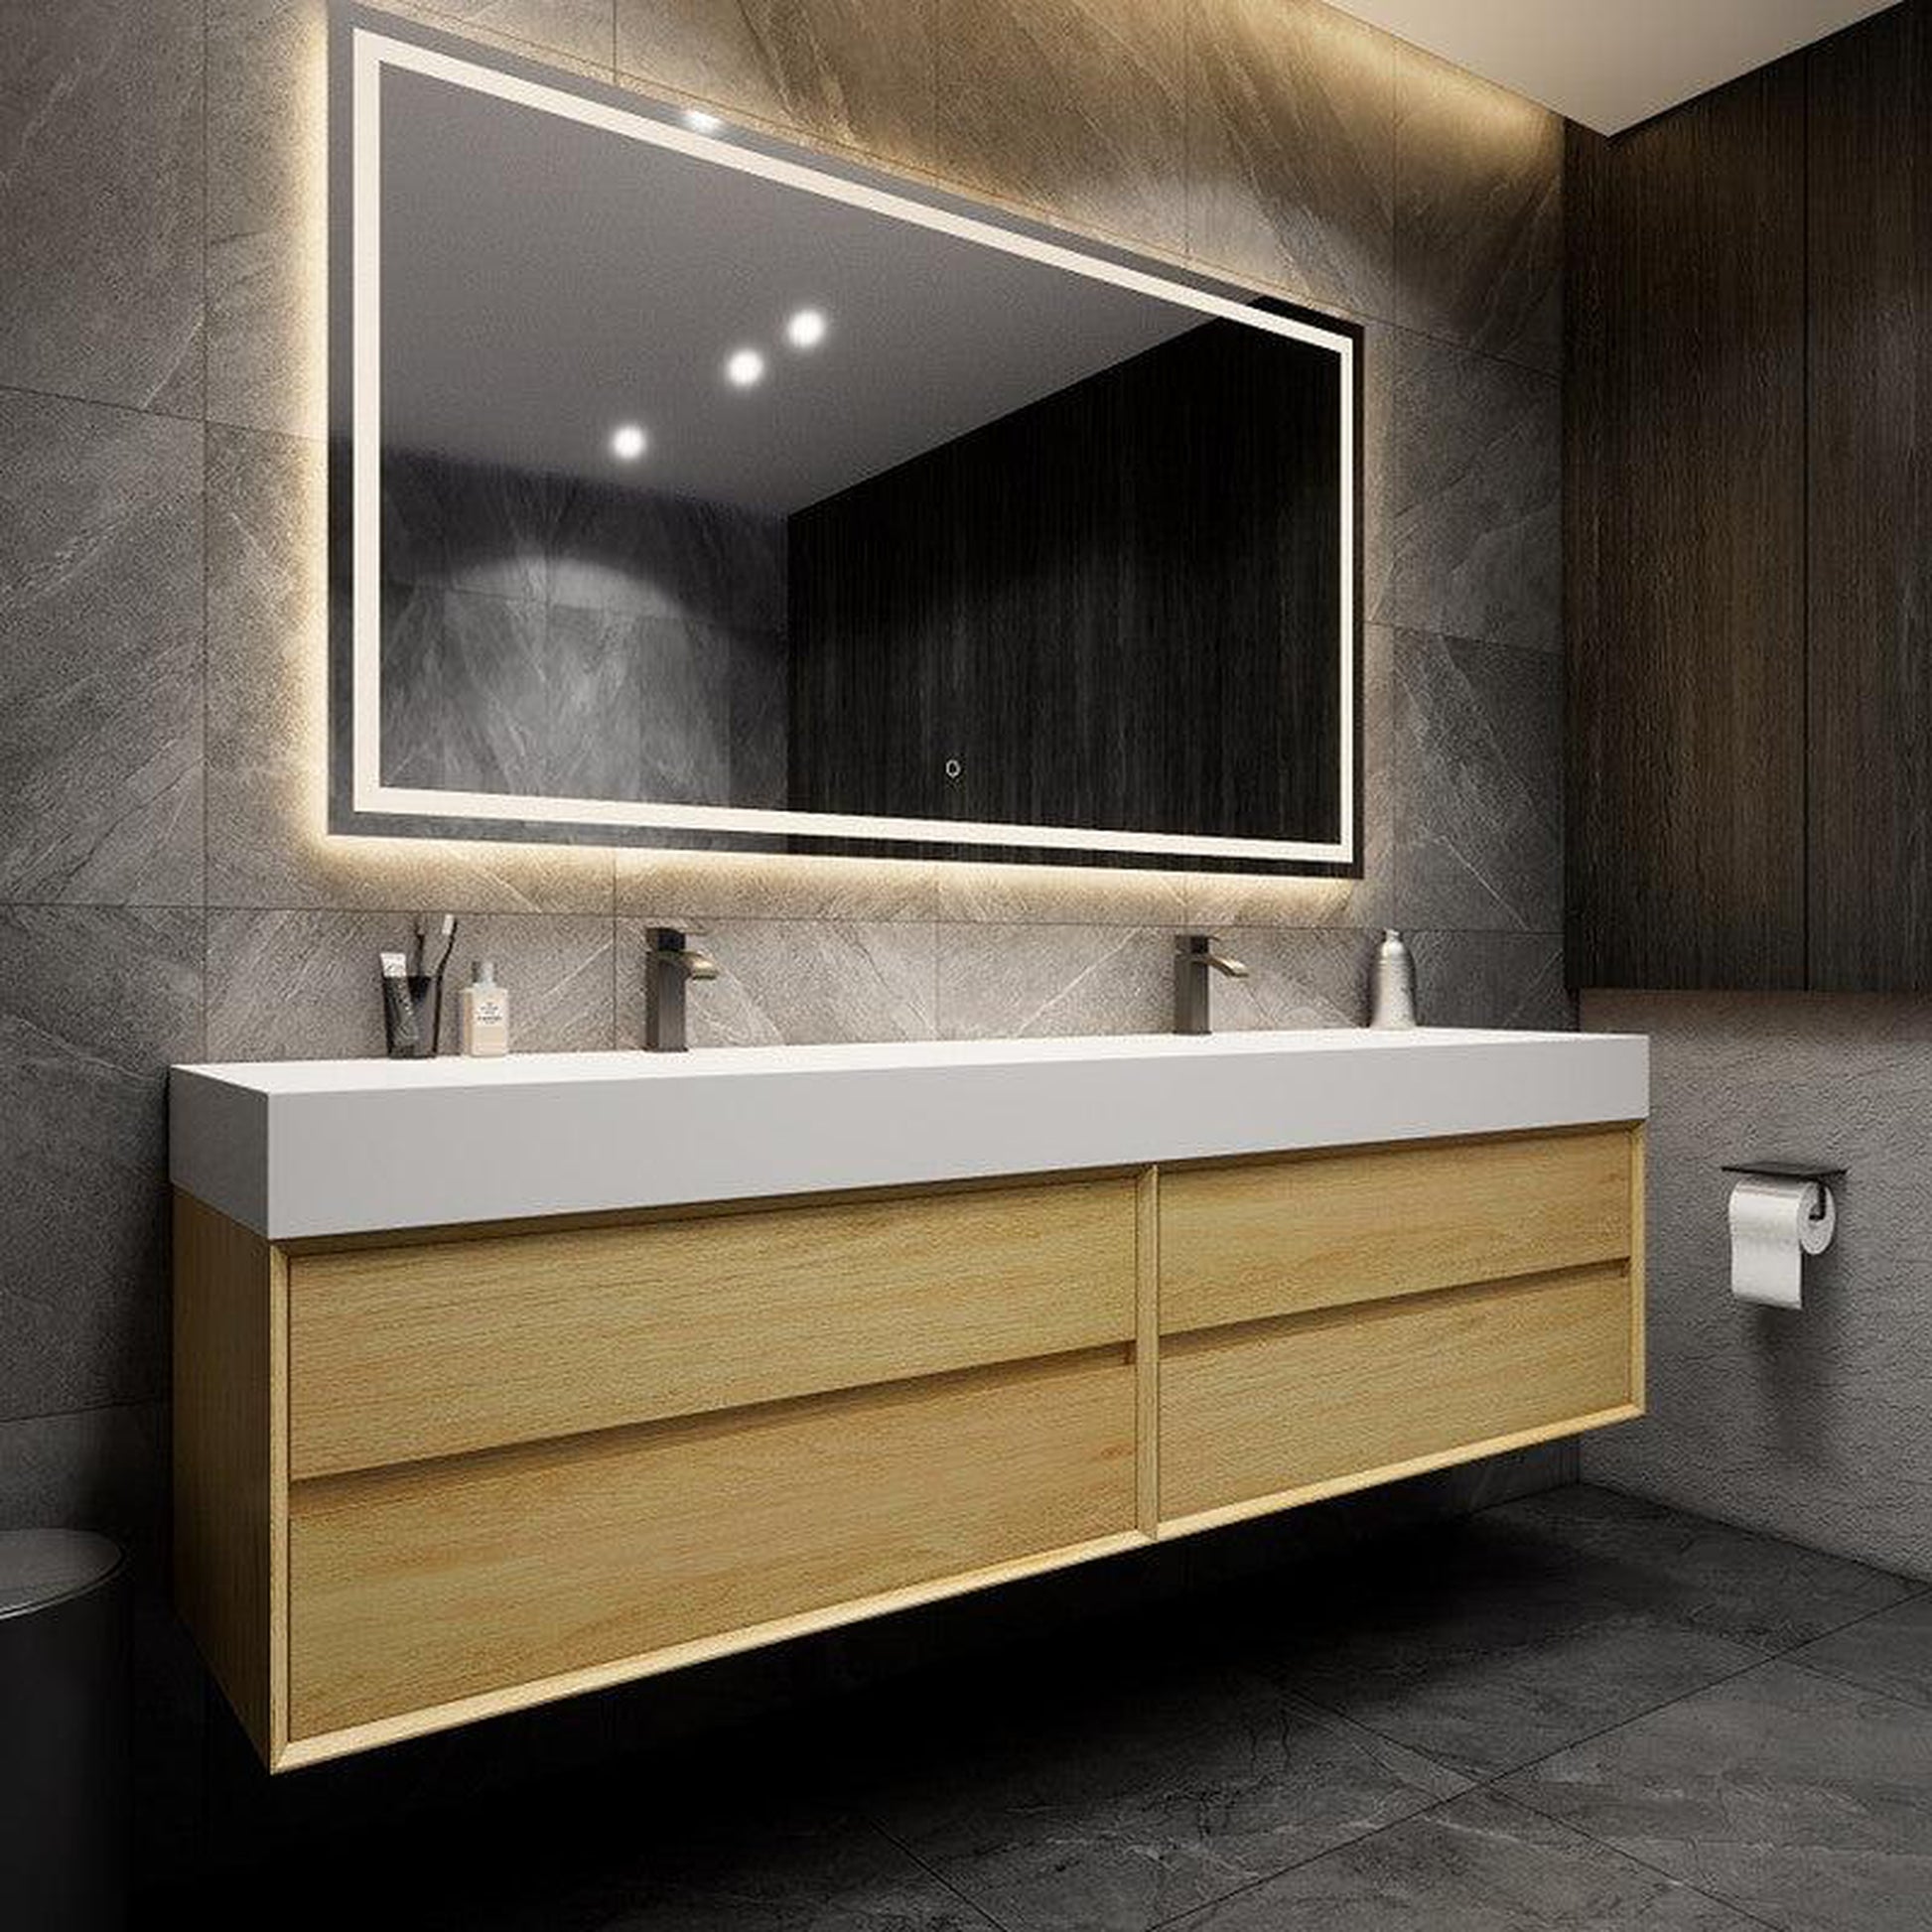 Moreno Bath MAX 84" Teak Oak Wall-Mounted Vanity With Double Faucet Holes and Reinforced White Acrylic Sink